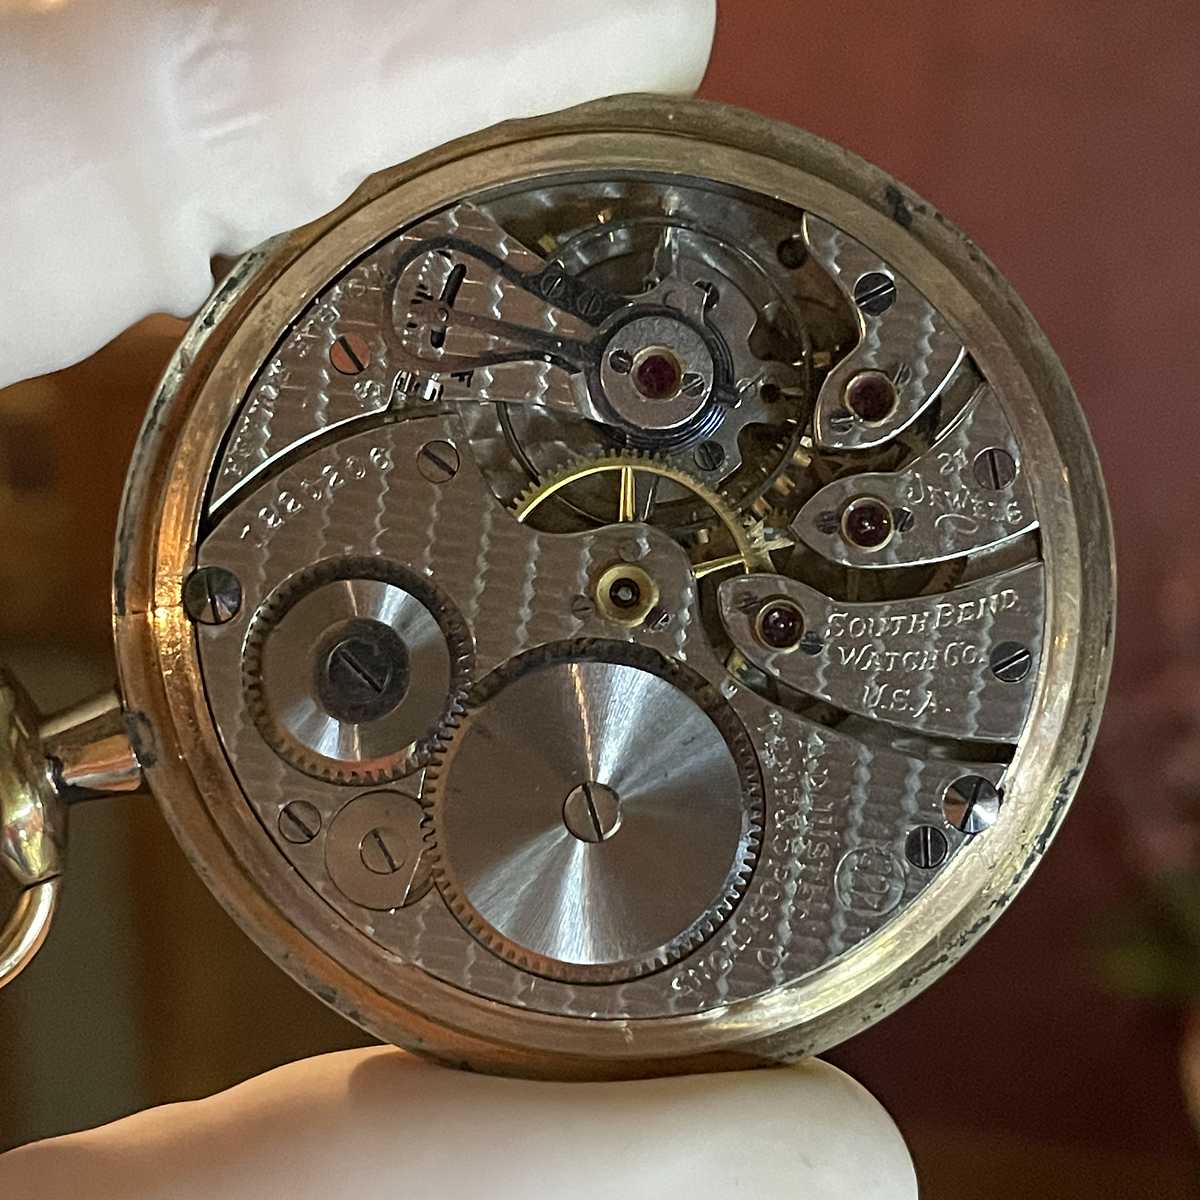 1928 South Bend Watch Grade 227 Movement in pocket watch case